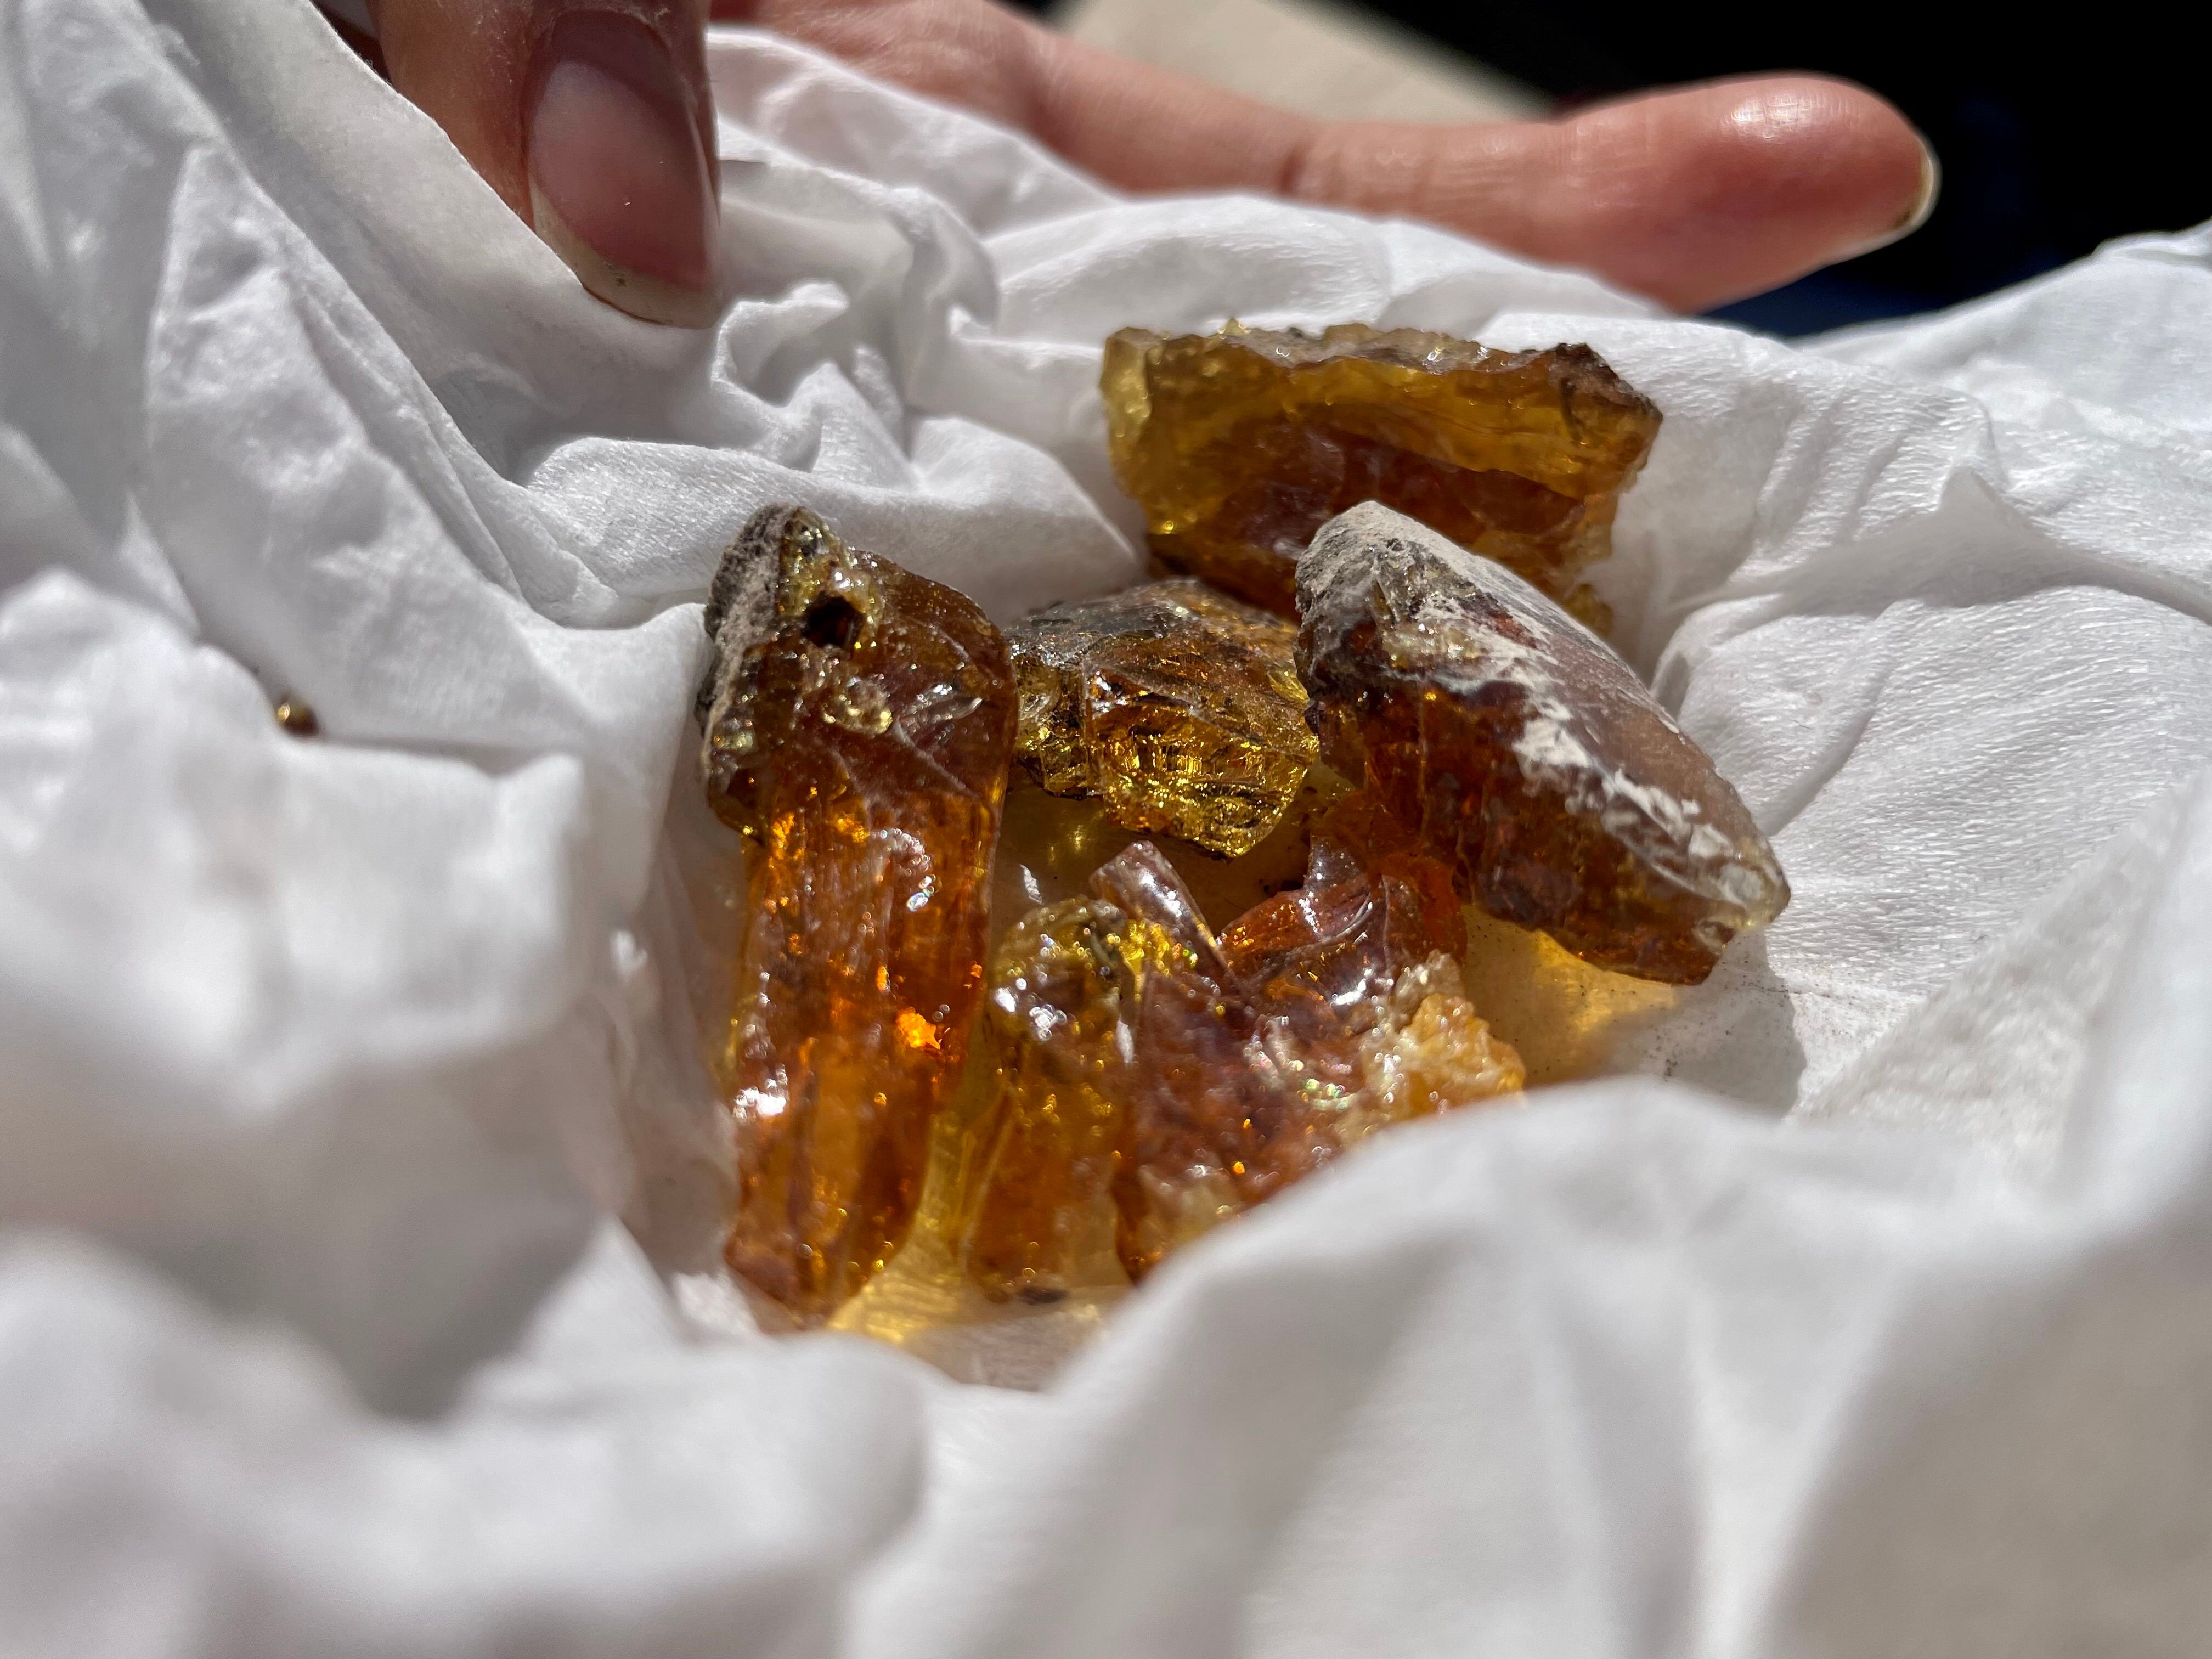 Once the amber fragments are cleaned up, they sparkle.